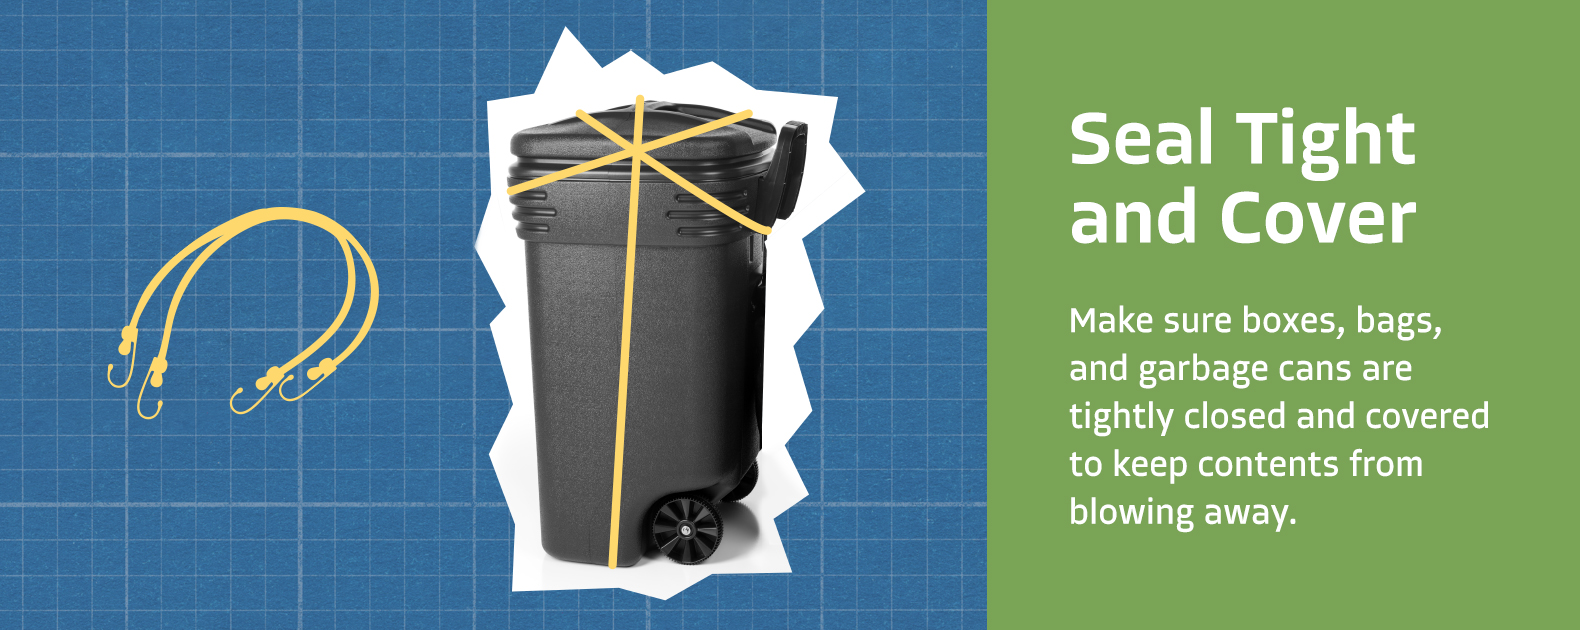 Seal tight and cover - Make sure boxes, bags, and garbage cans are tightly closed to keep contents from blowing away.